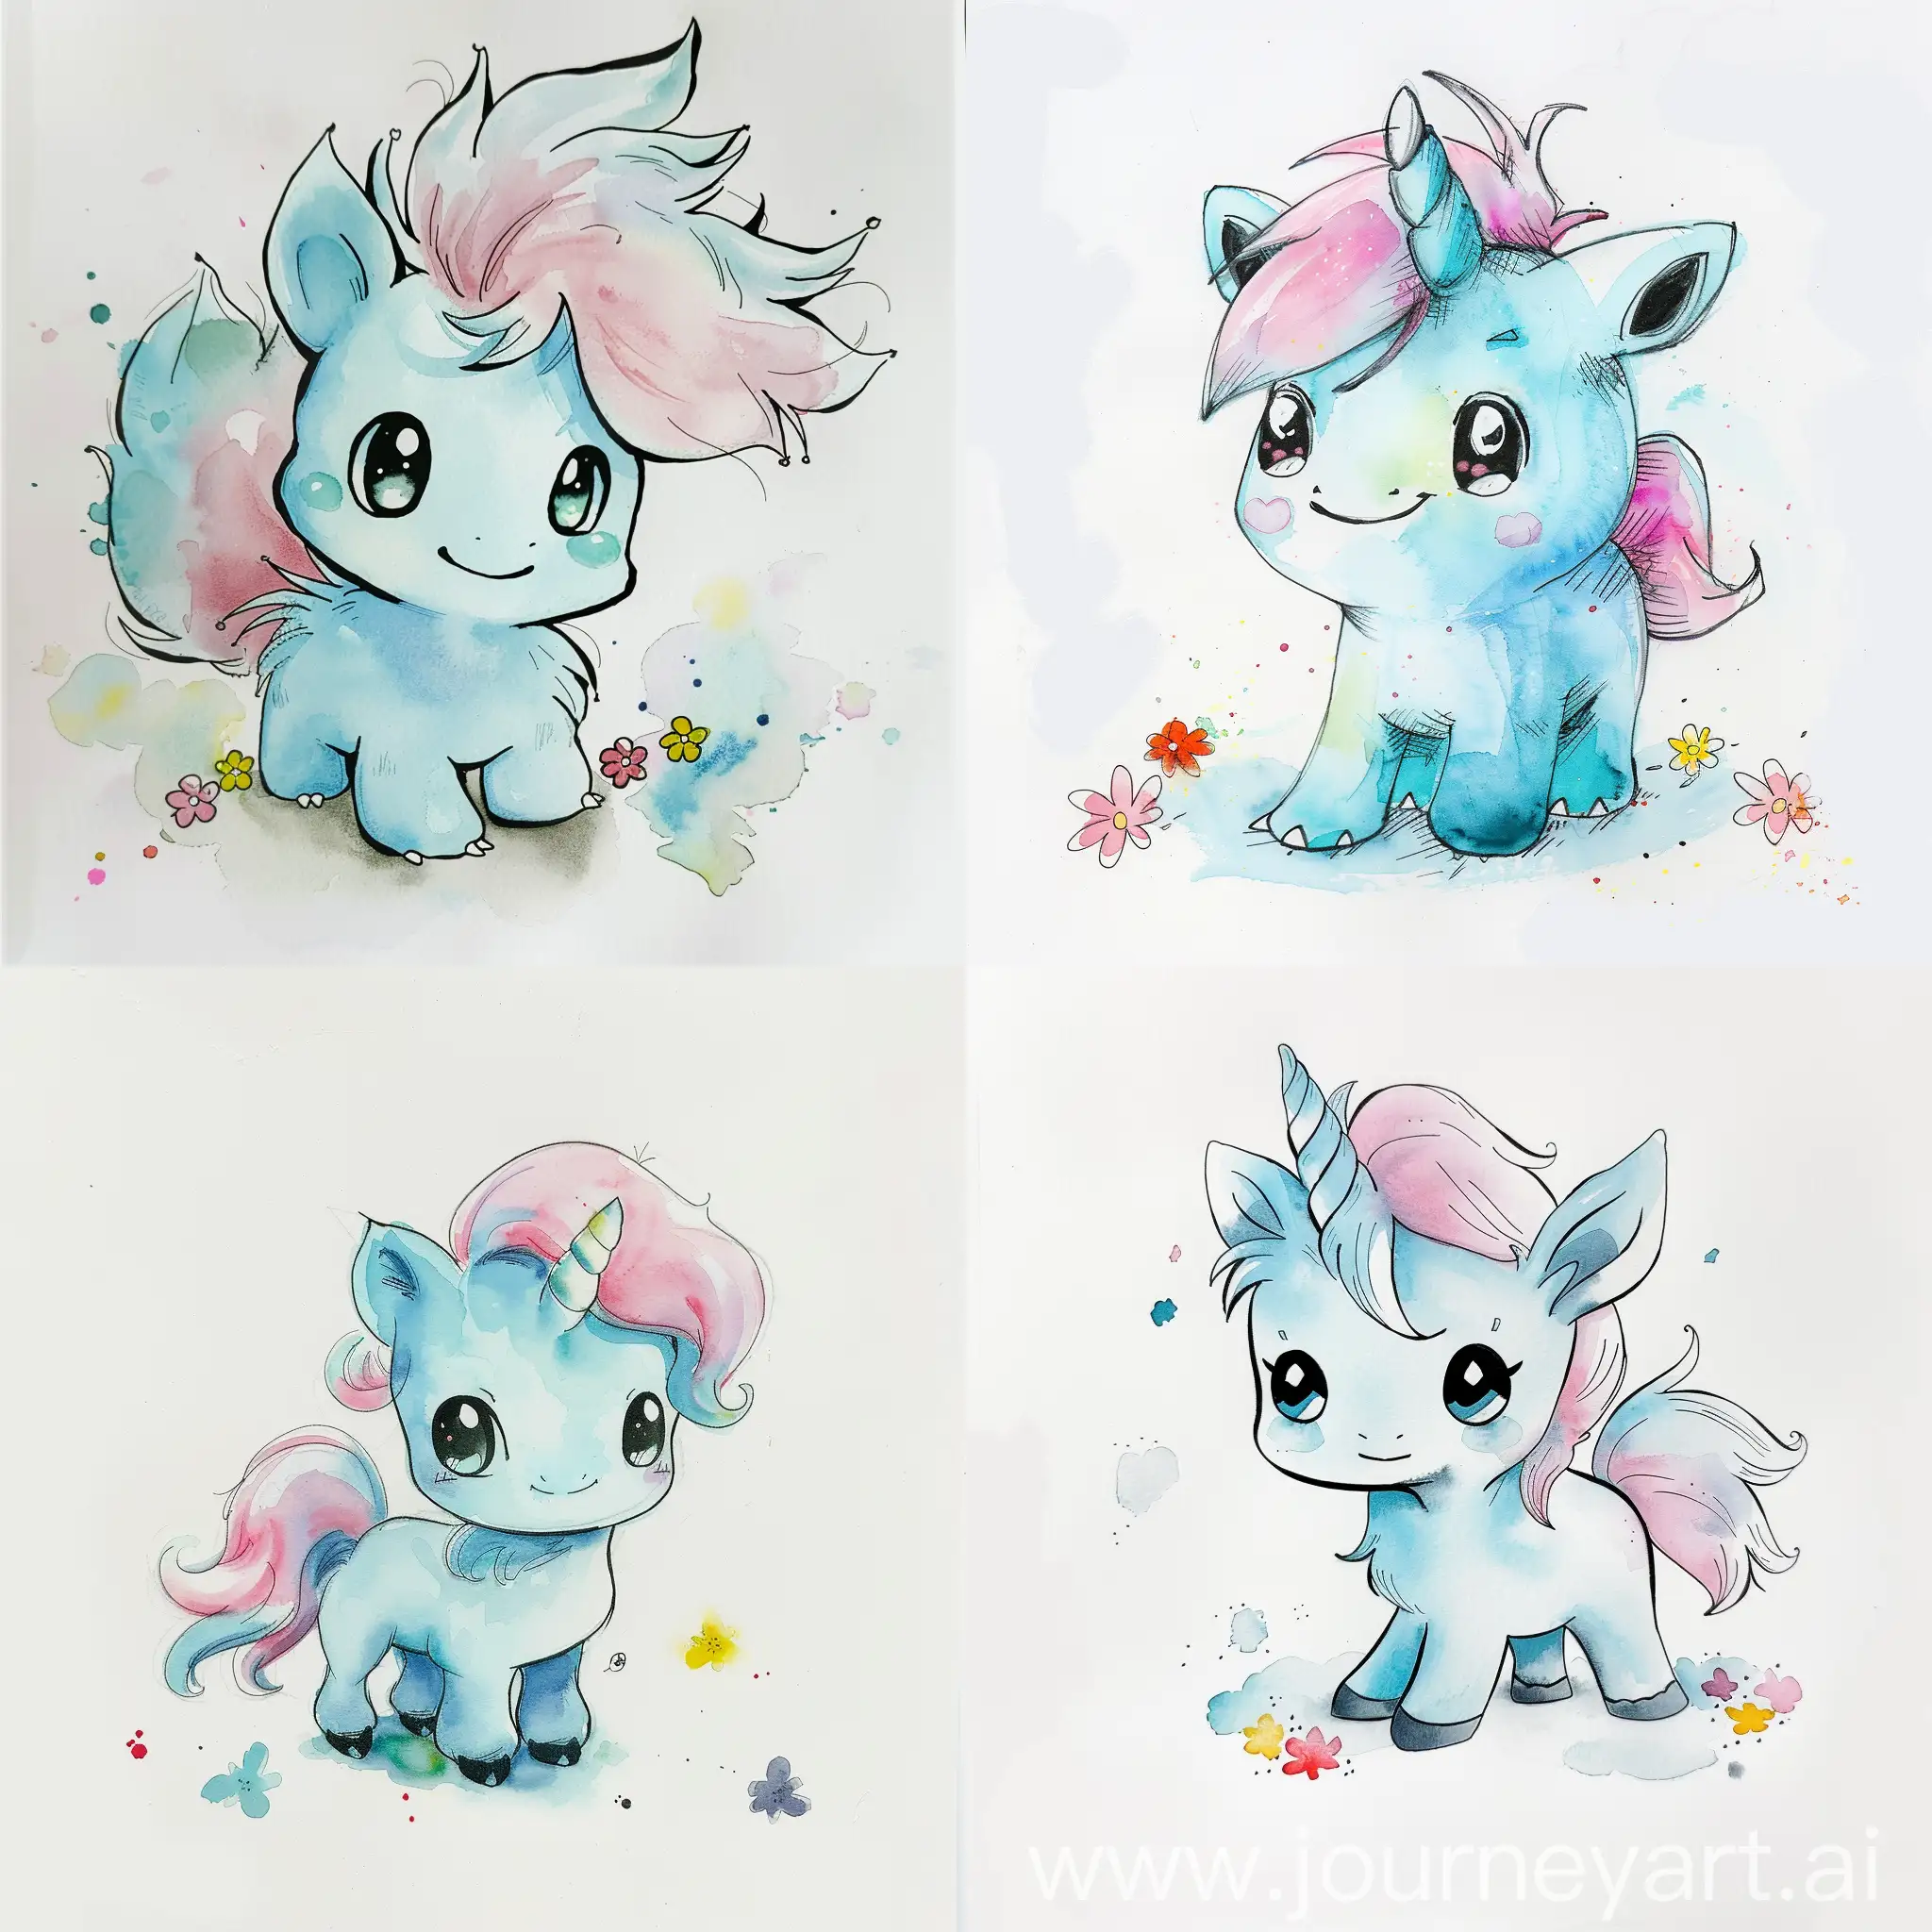 Adorable-PokemonInspired-Watercolor-Blue-Fur-Creature-with-Pink-Mane